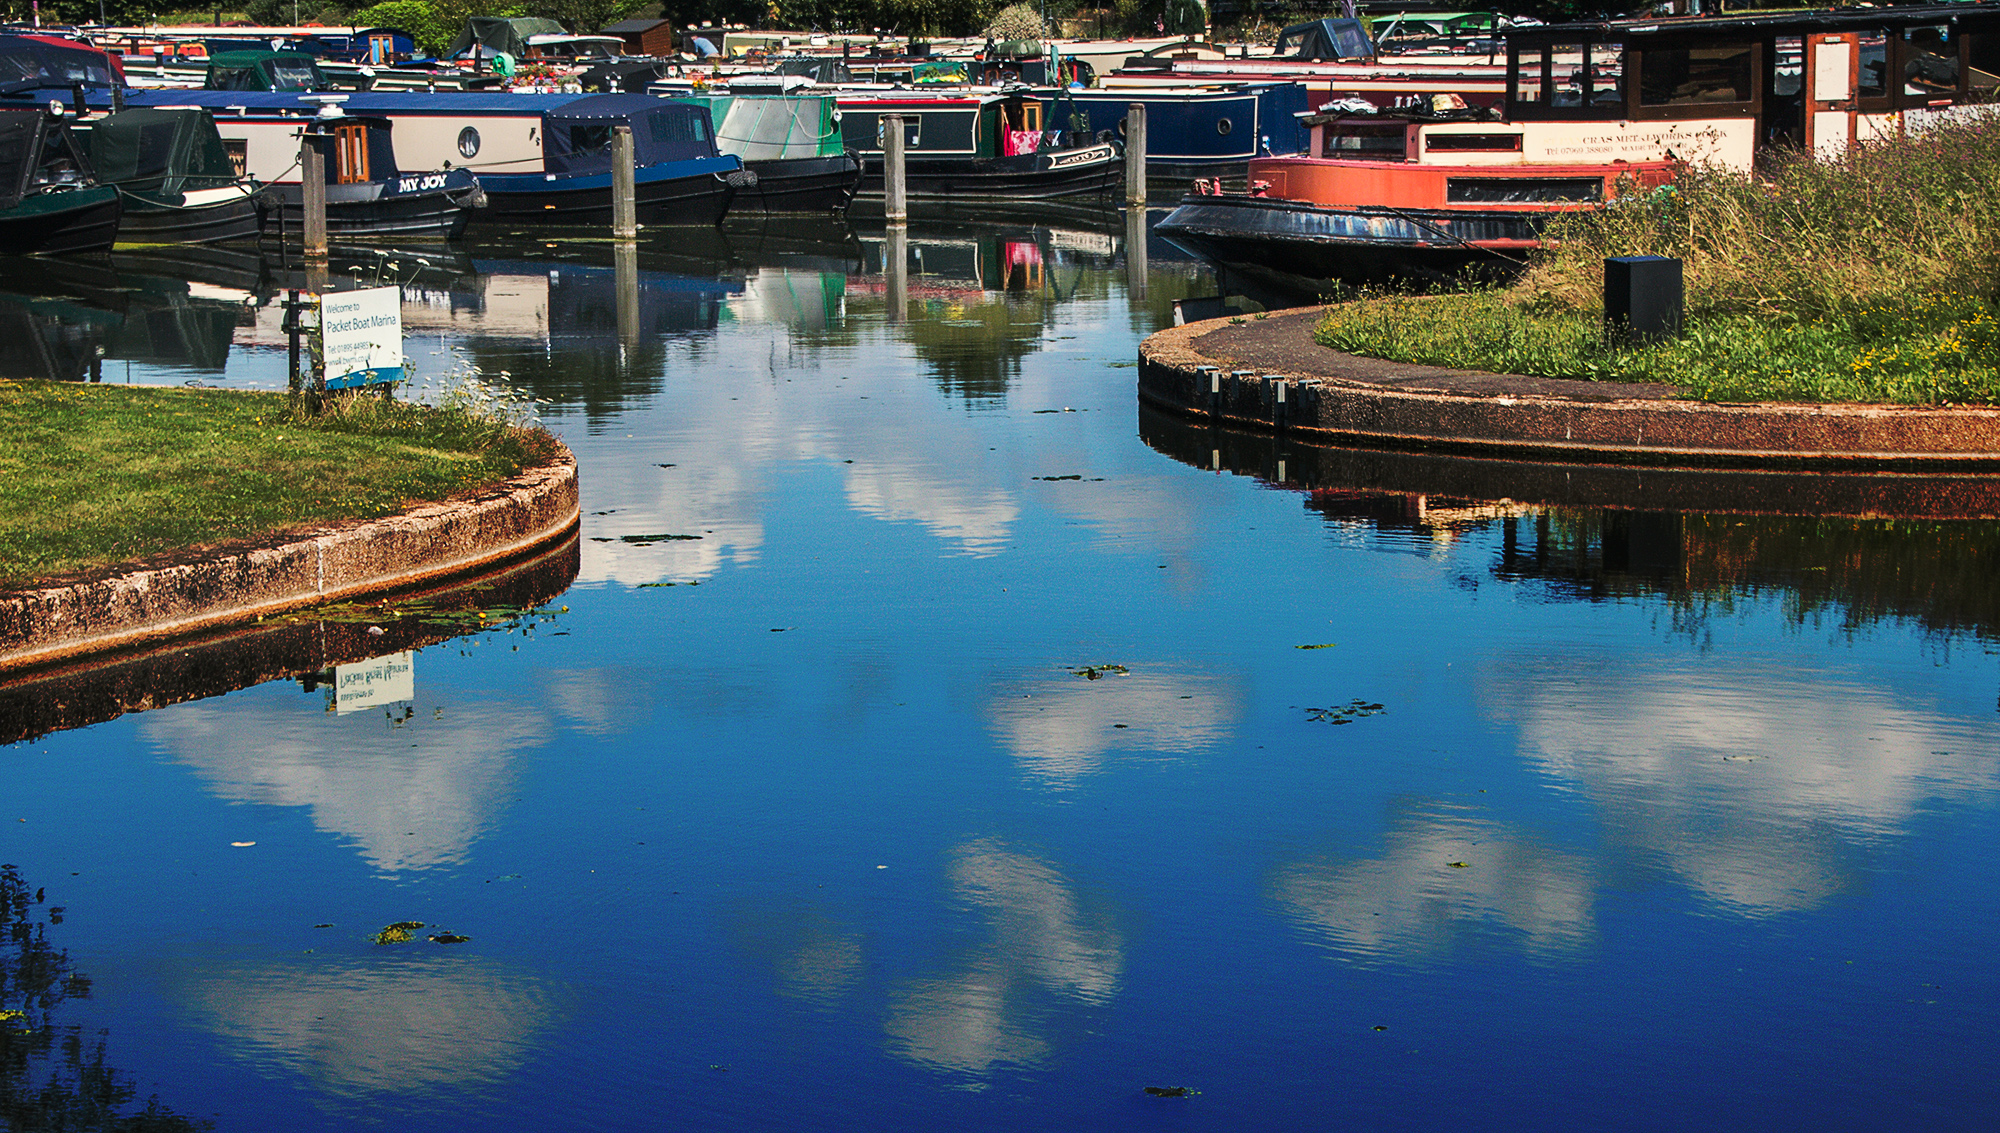 5784-clouds-over-marina-off-slough-branch-of-grand-union-canal